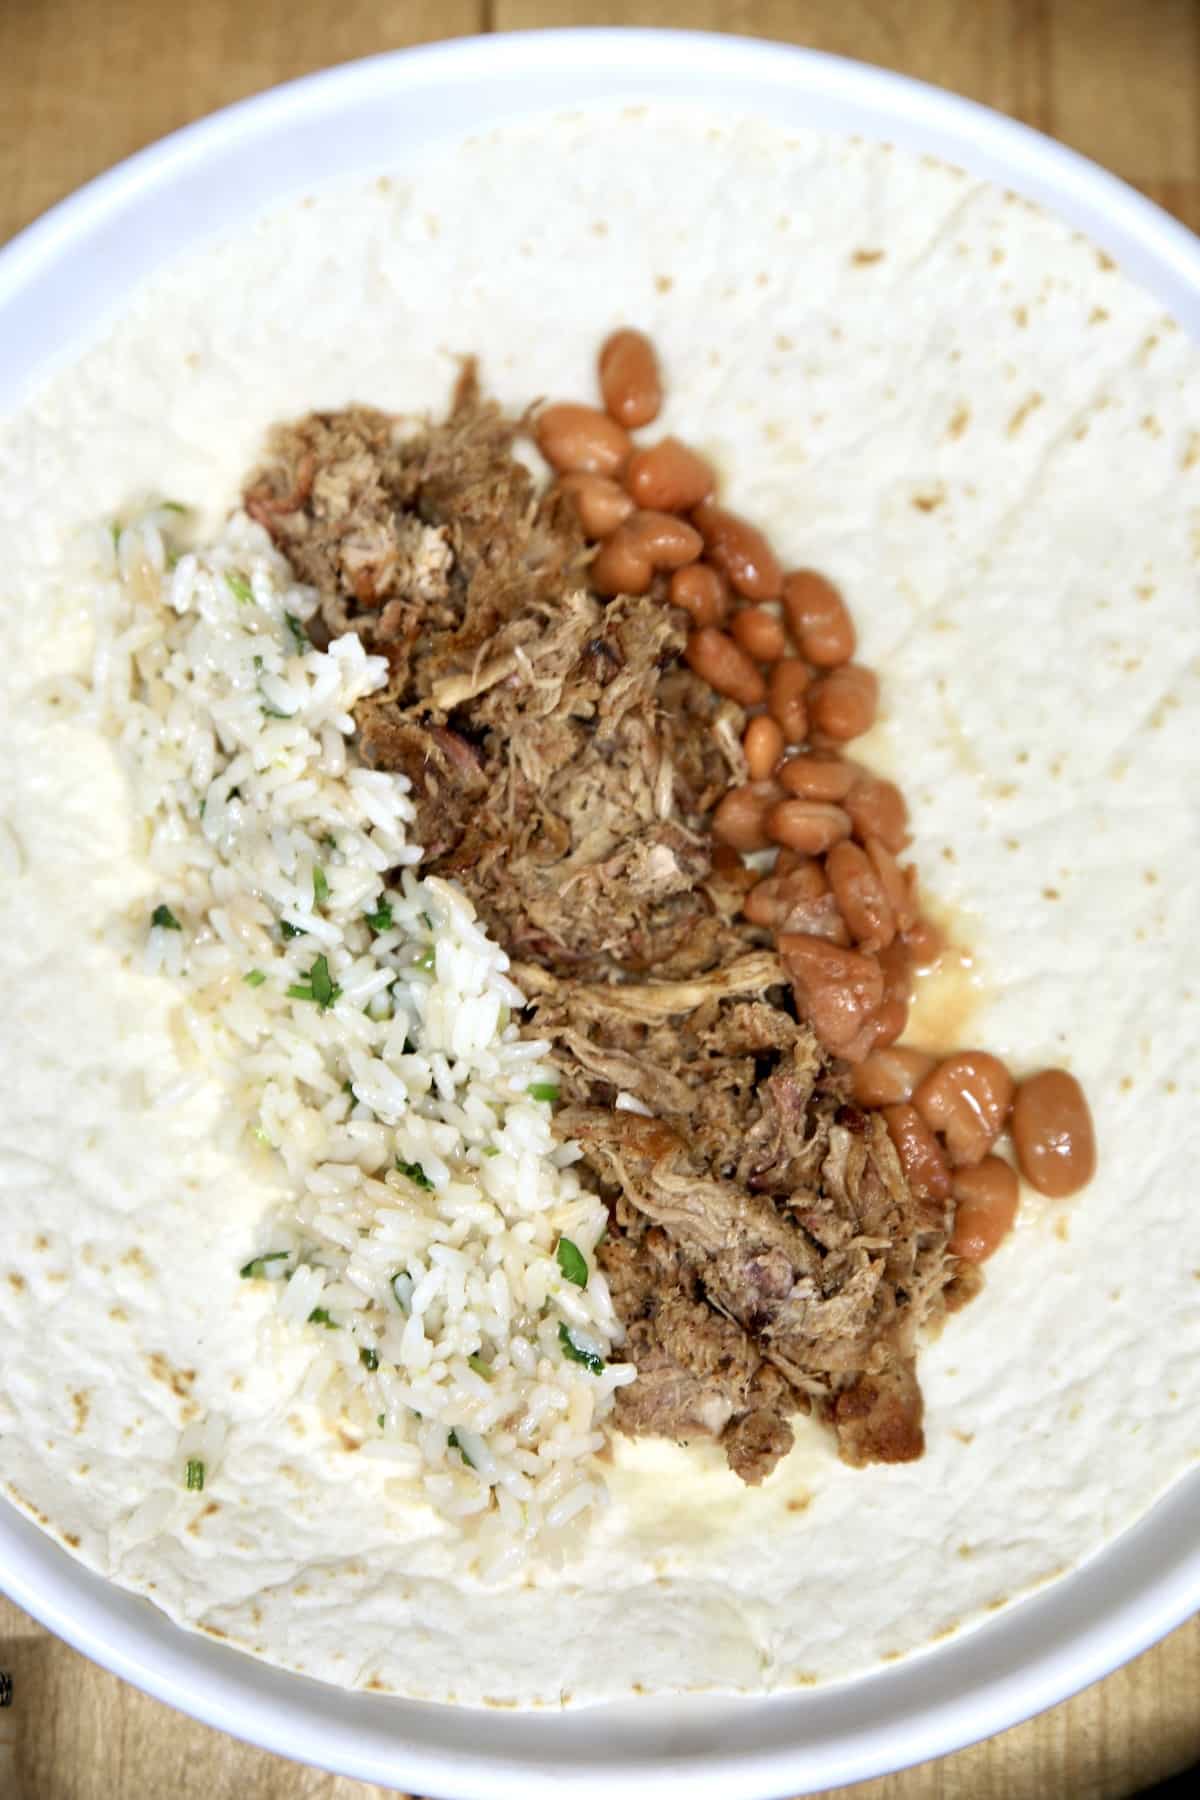 Making a burrito with rice, pulled pork, pinto beans.